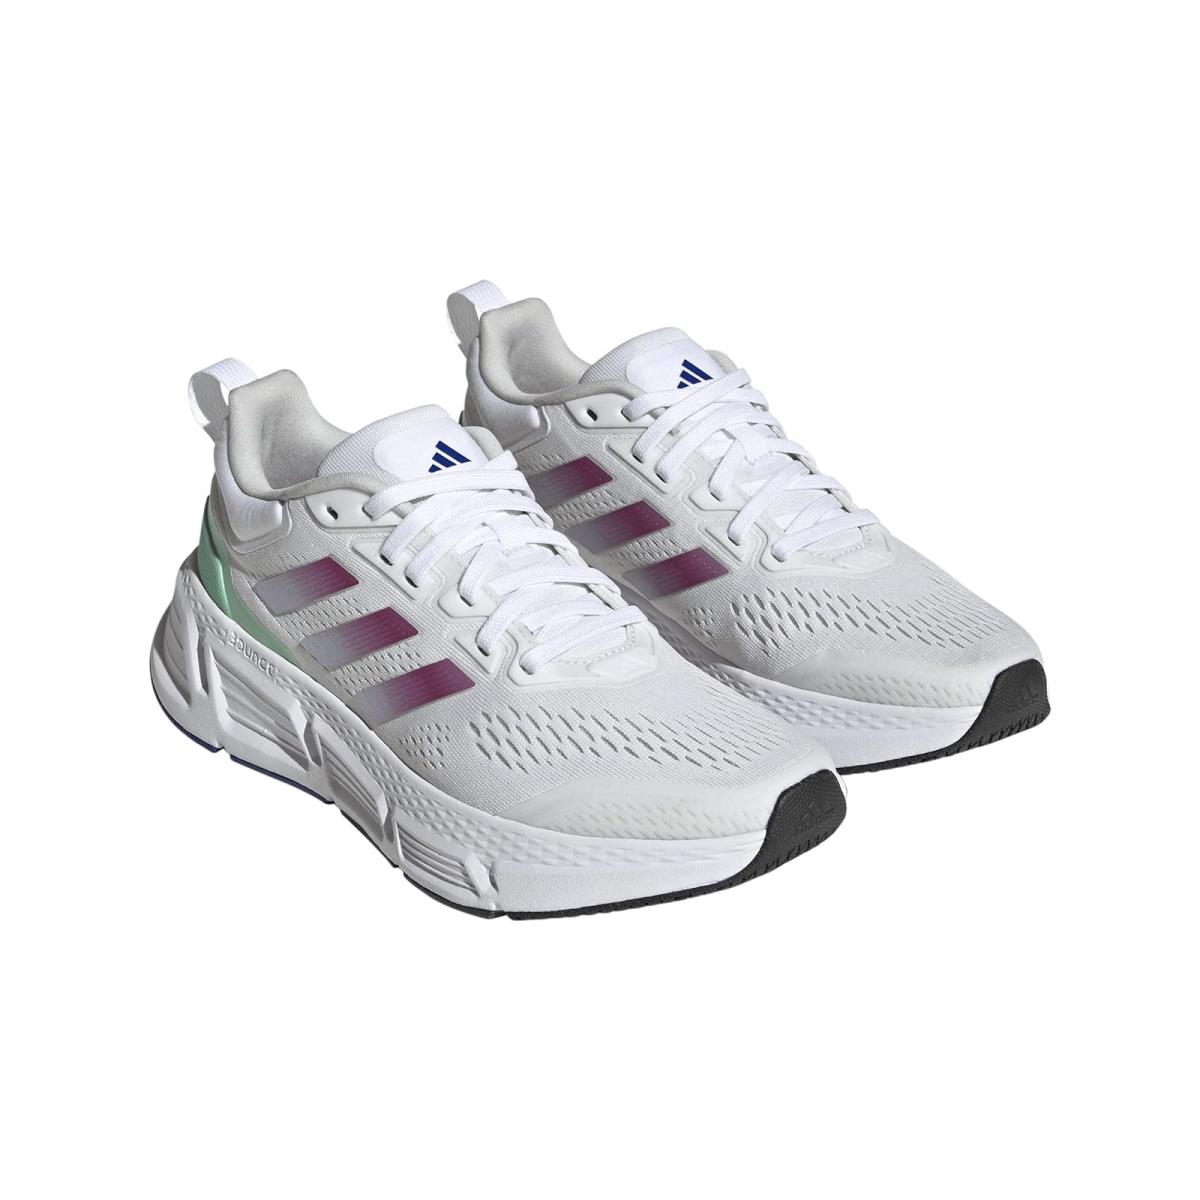 Woman`s Sneakers Athletic Shoes Adidas Running Questar White/Lucid Fuchsia/Silver Dawn